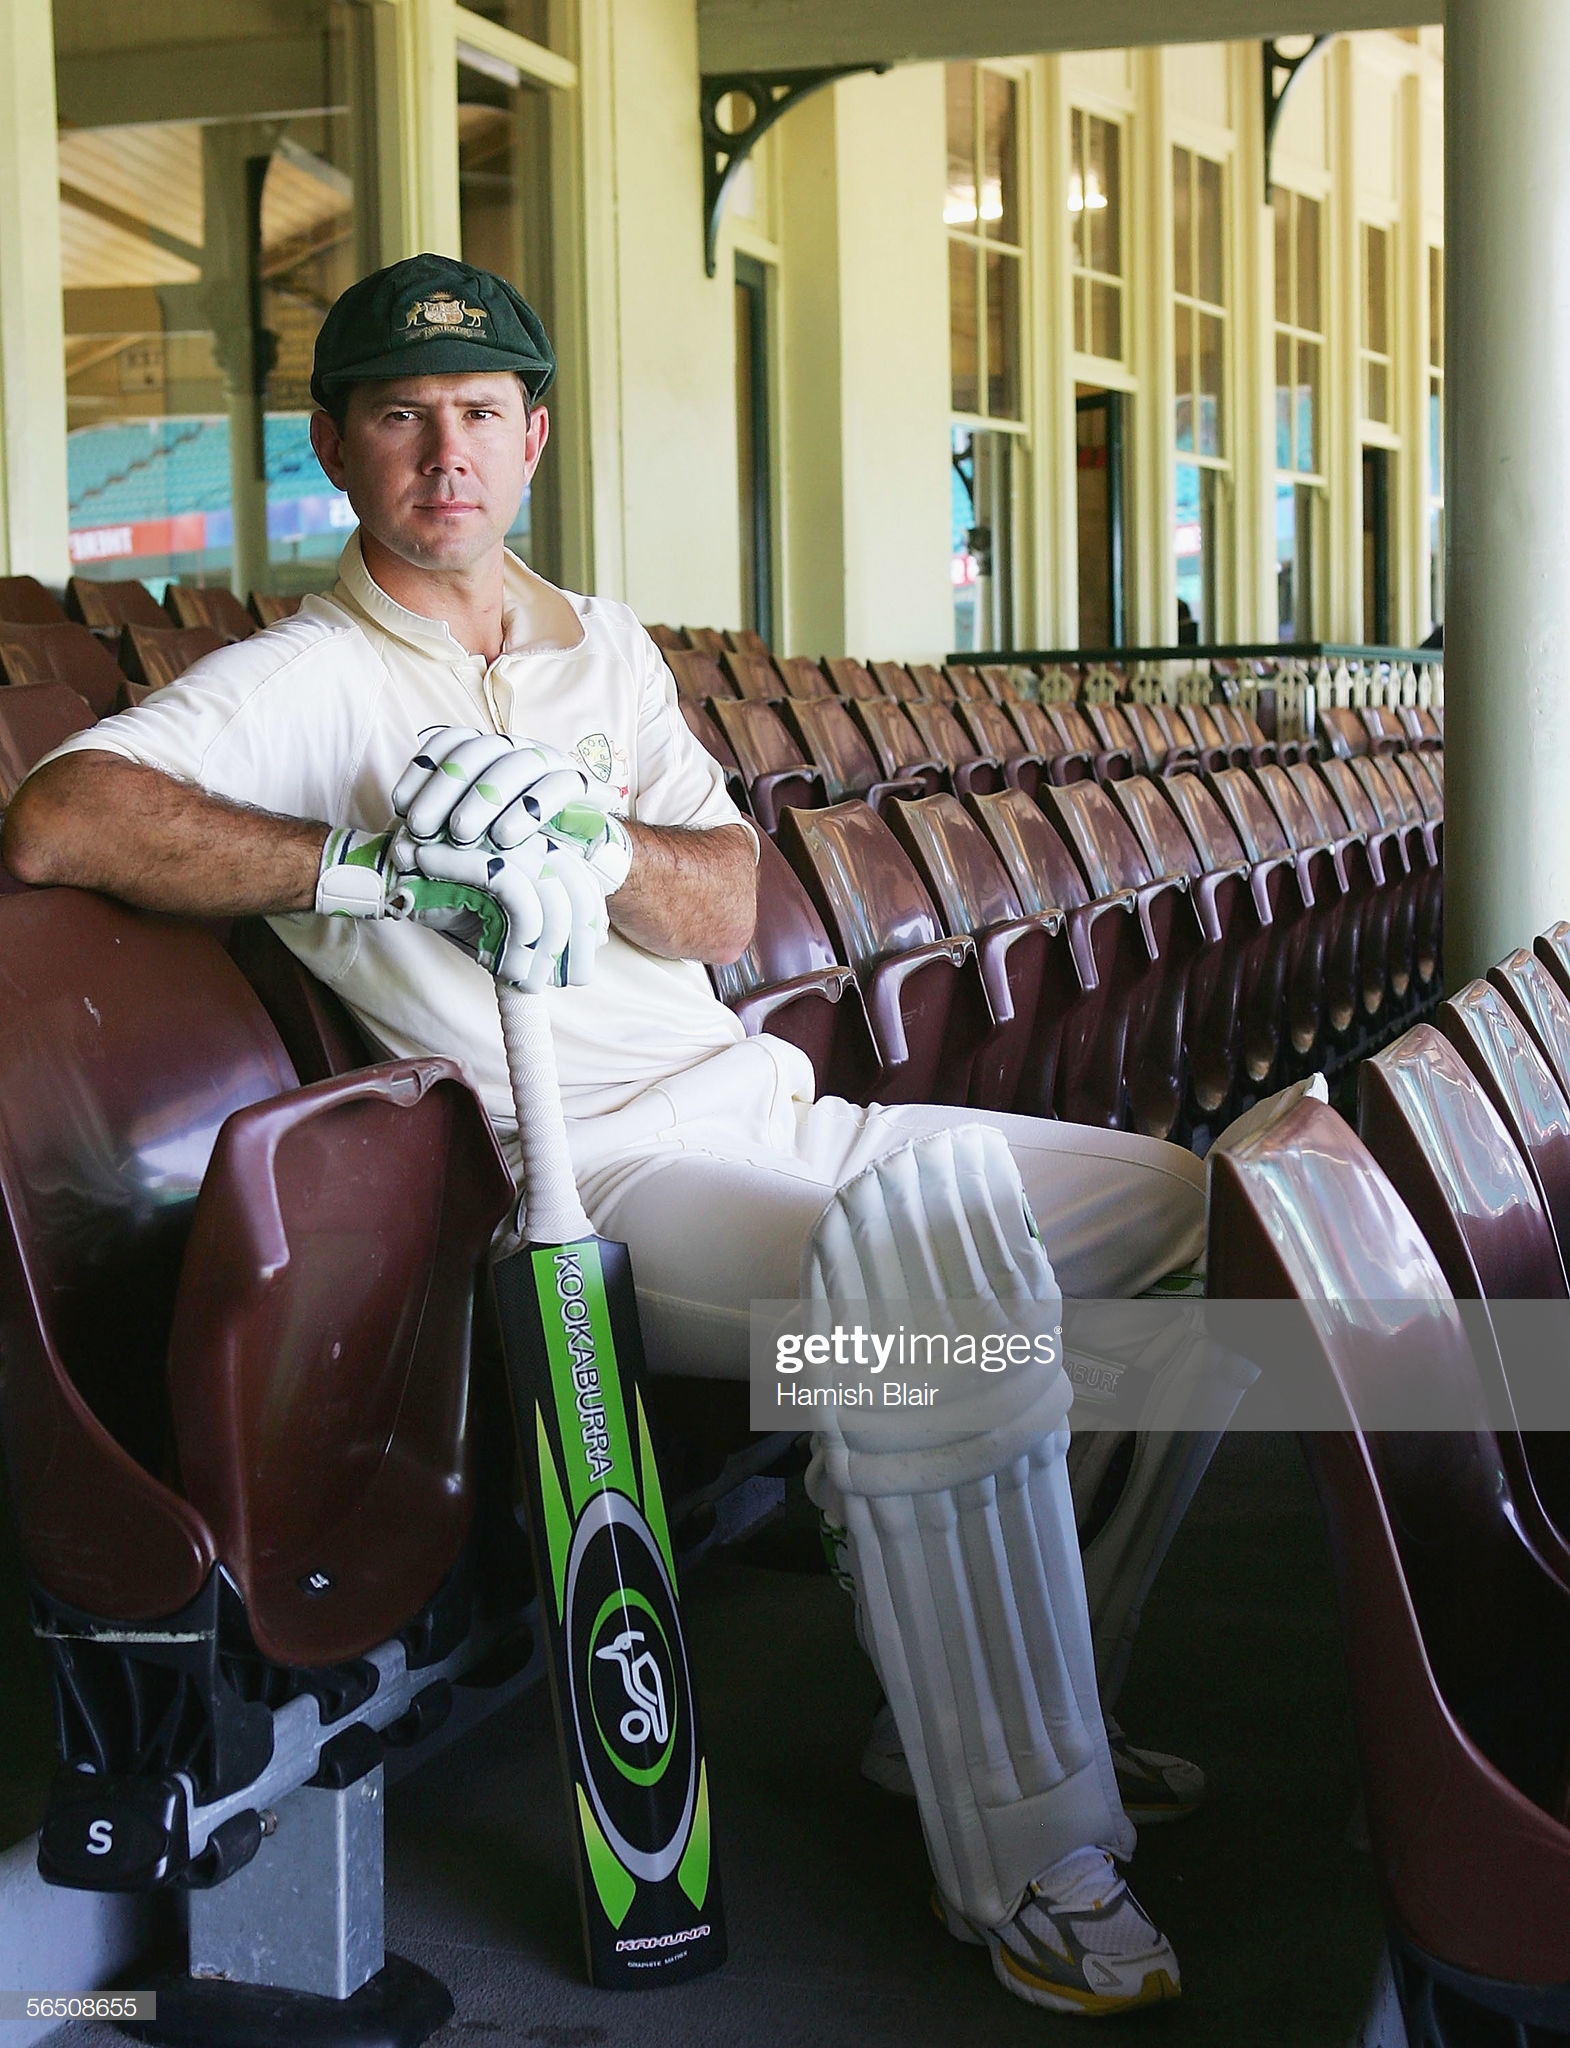 australian-captain-ricky-ponting-poses-in-the-pavilion-ahead-of-the-picture-id56508655